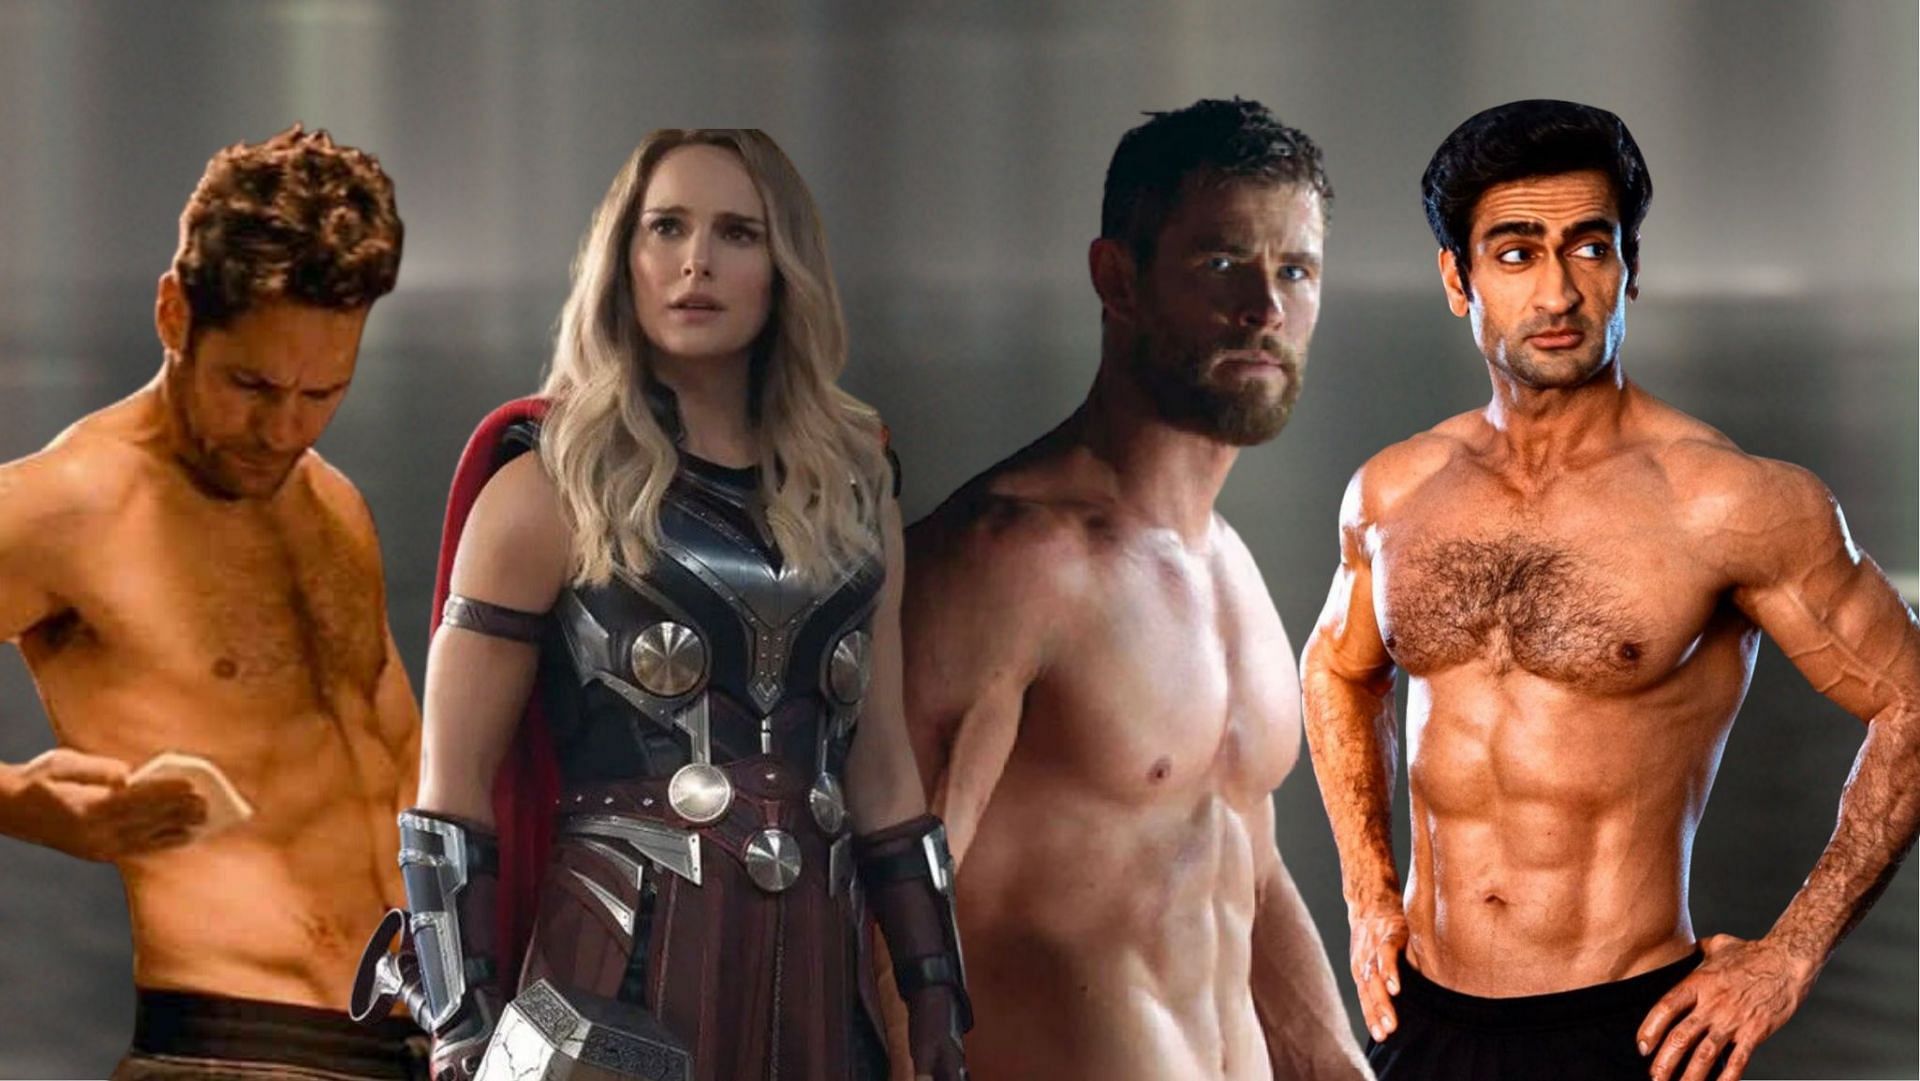 &quot;From Superhero Physiques to Chiseled Warriors: The Top 10 Marvel Actors Who Astonished the World with their Incredible Body Transformations (Image via Sportskeeda)